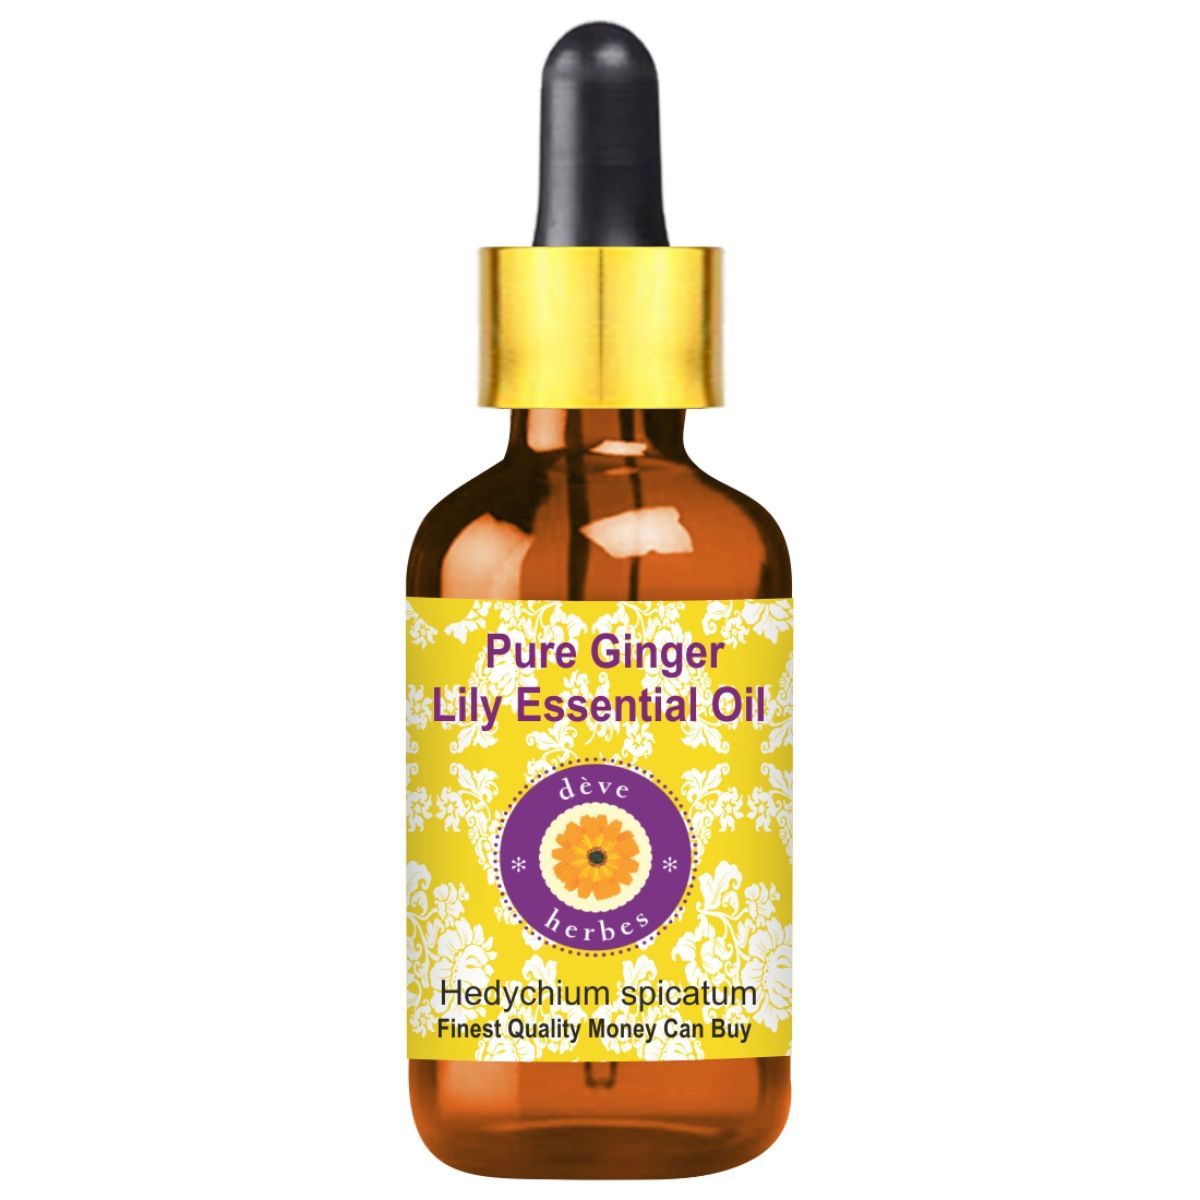 Buy Deve Herbes Pure Ginger Lily Essential Oil (Hedychium spicatum) with Glass Dropper Natural Therapeutic Grade Steam Distilled 5ml - Purplle